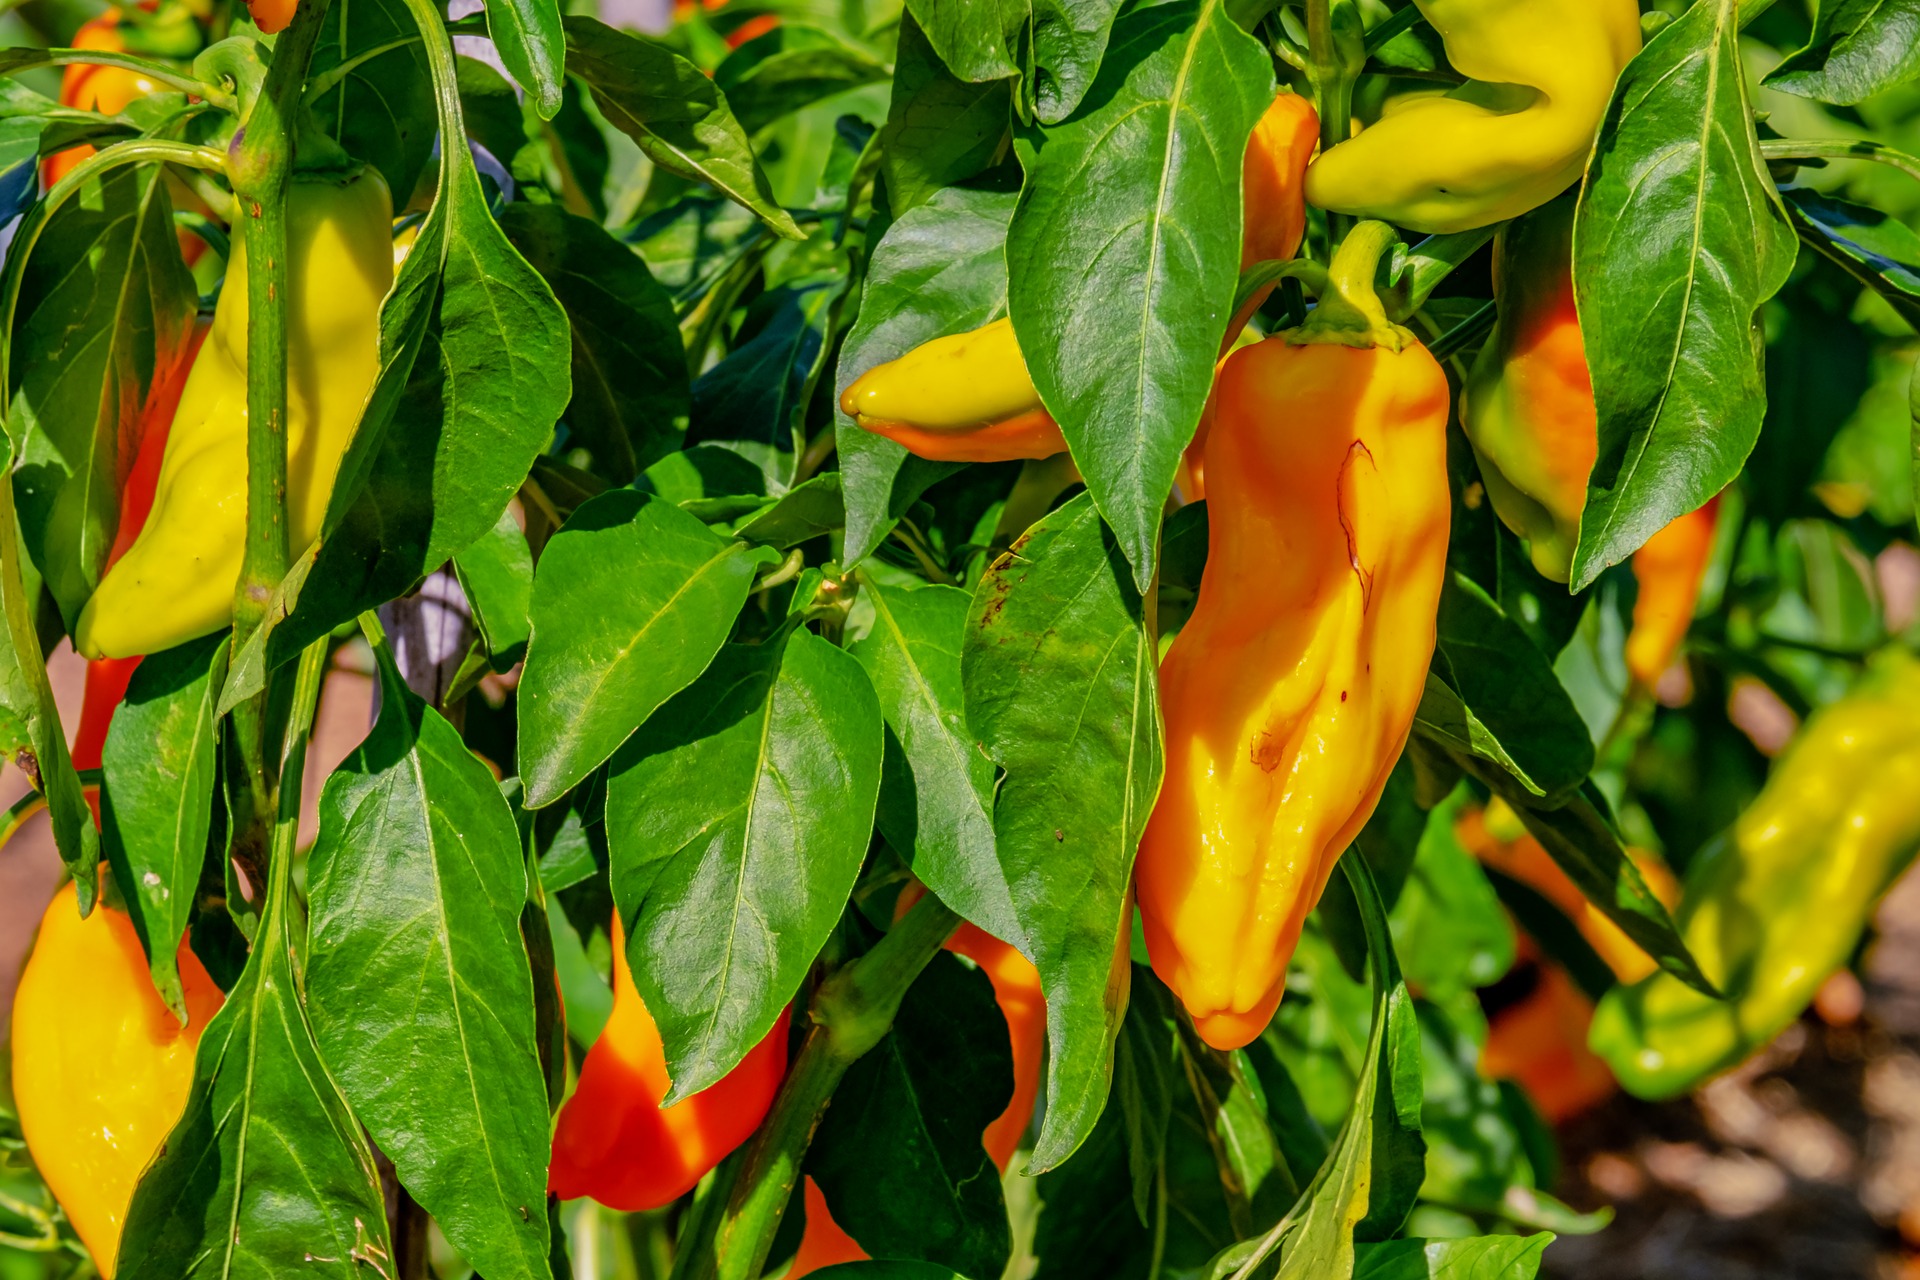 Yellow pointed bell pepper plant